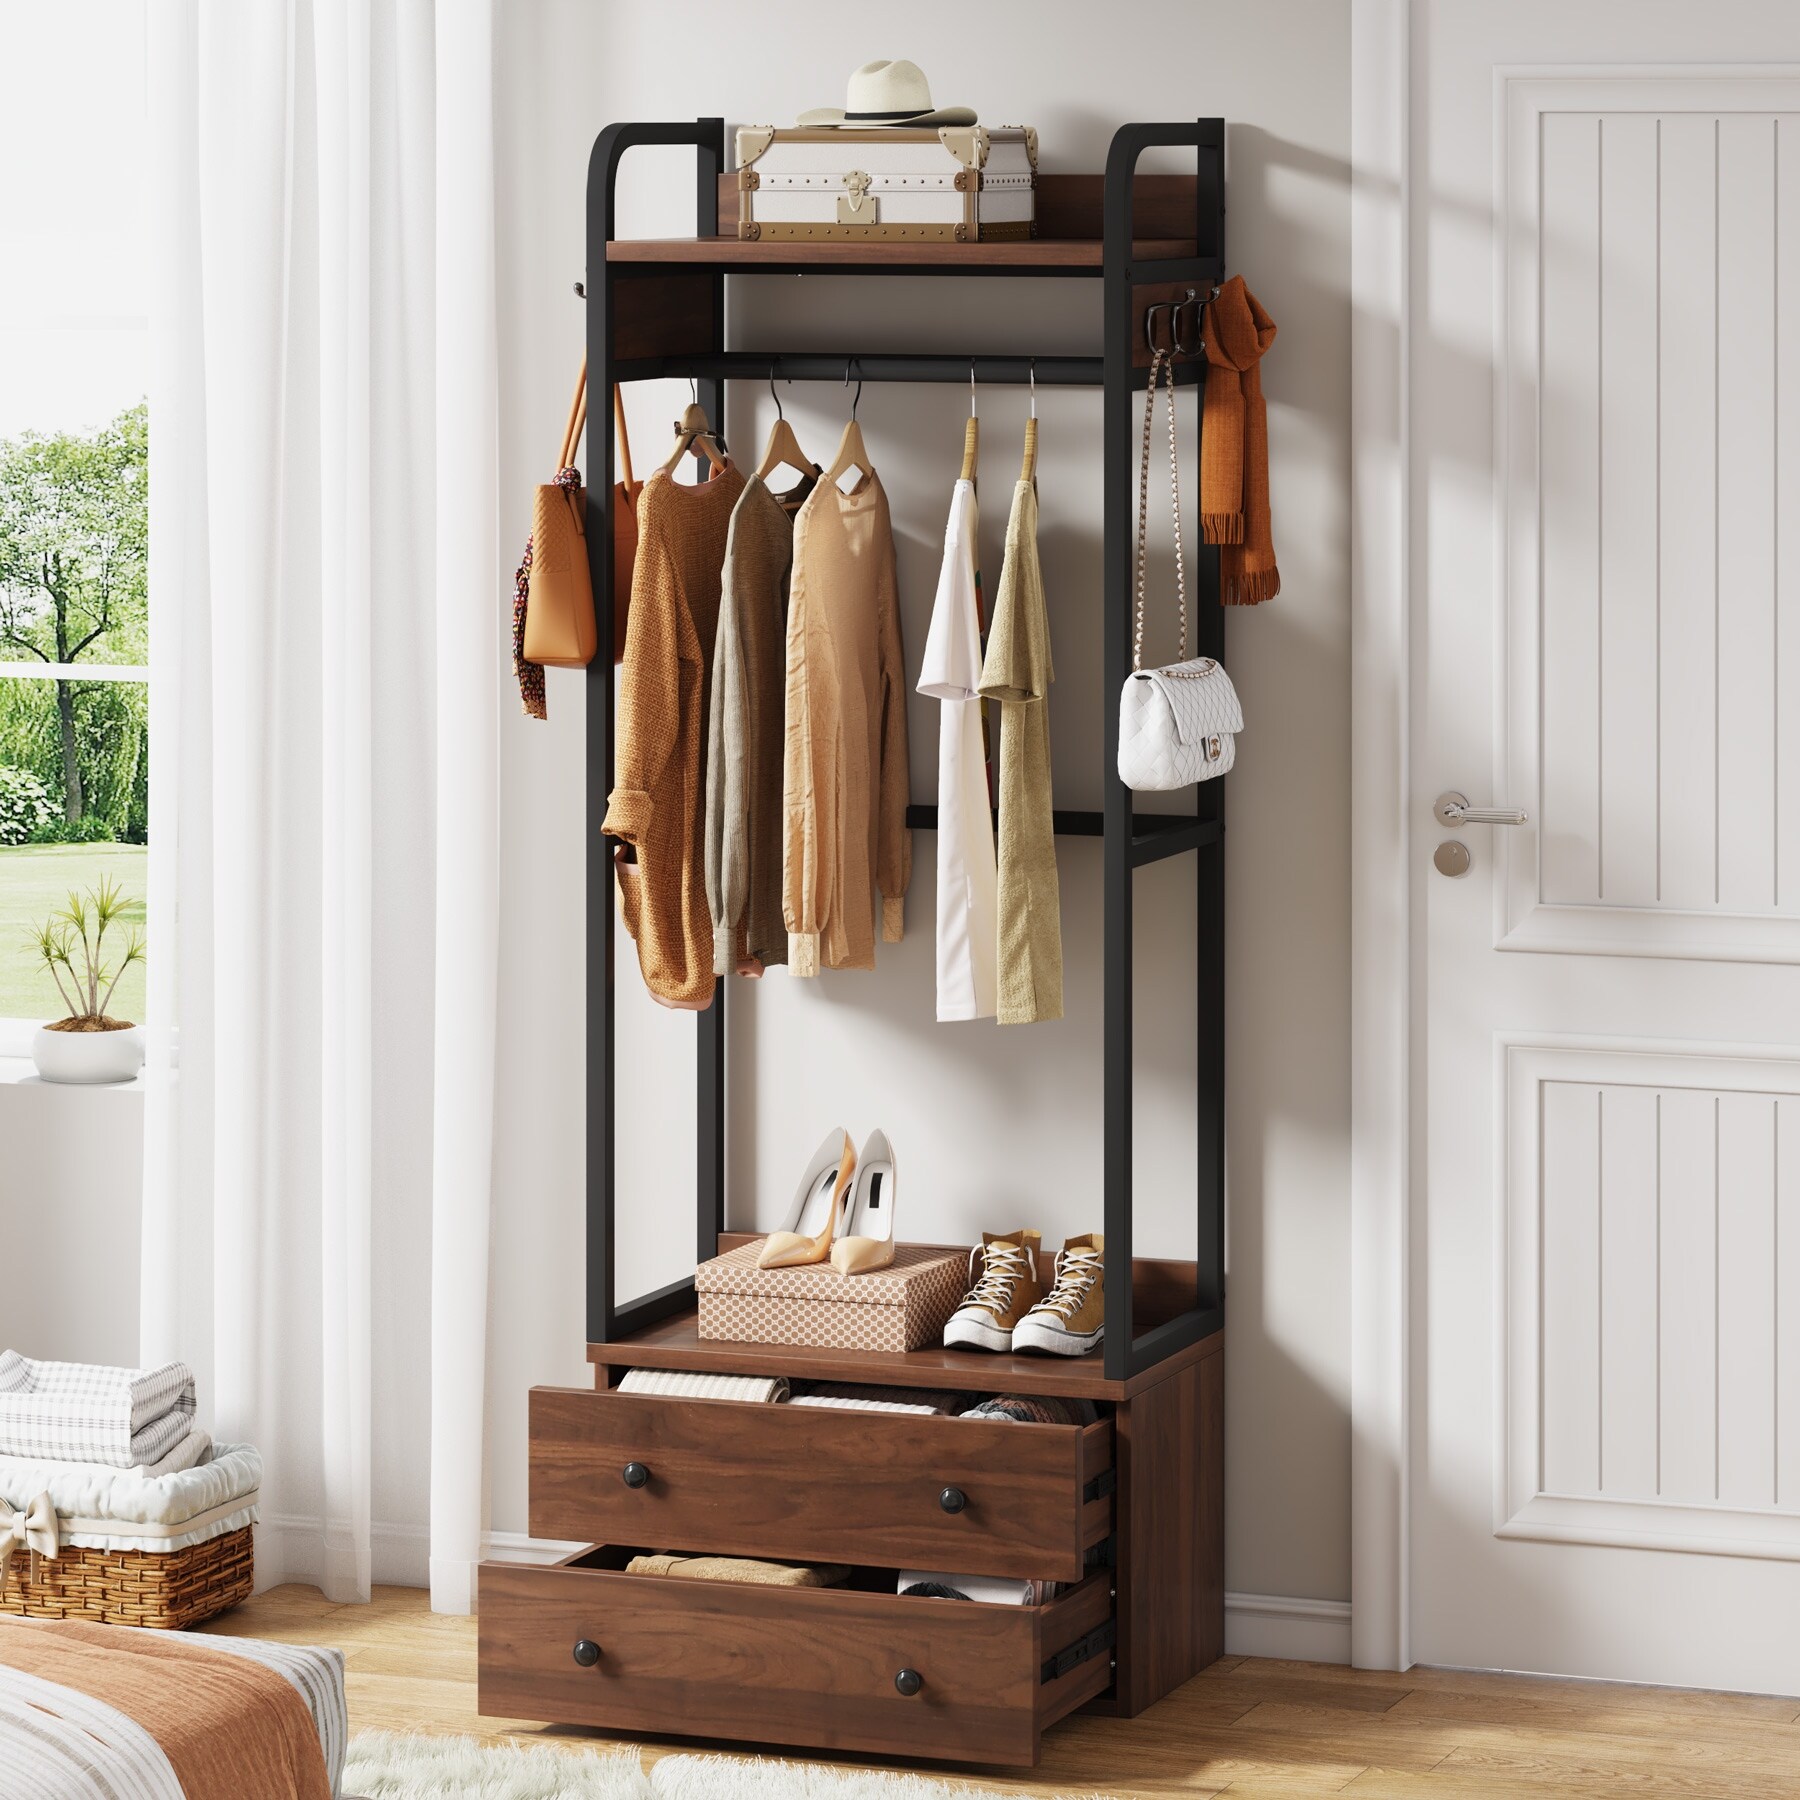 https://ak1.ostkcdn.com/images/products/is/images/direct/142d2ade4ec9ba72d9d748a323cfa5e32fd4e981/Freestanding-Closet-Organizer-Small-Clothes-Rack-Coat-Rack-with-Drawers-and-Shelves.jpg